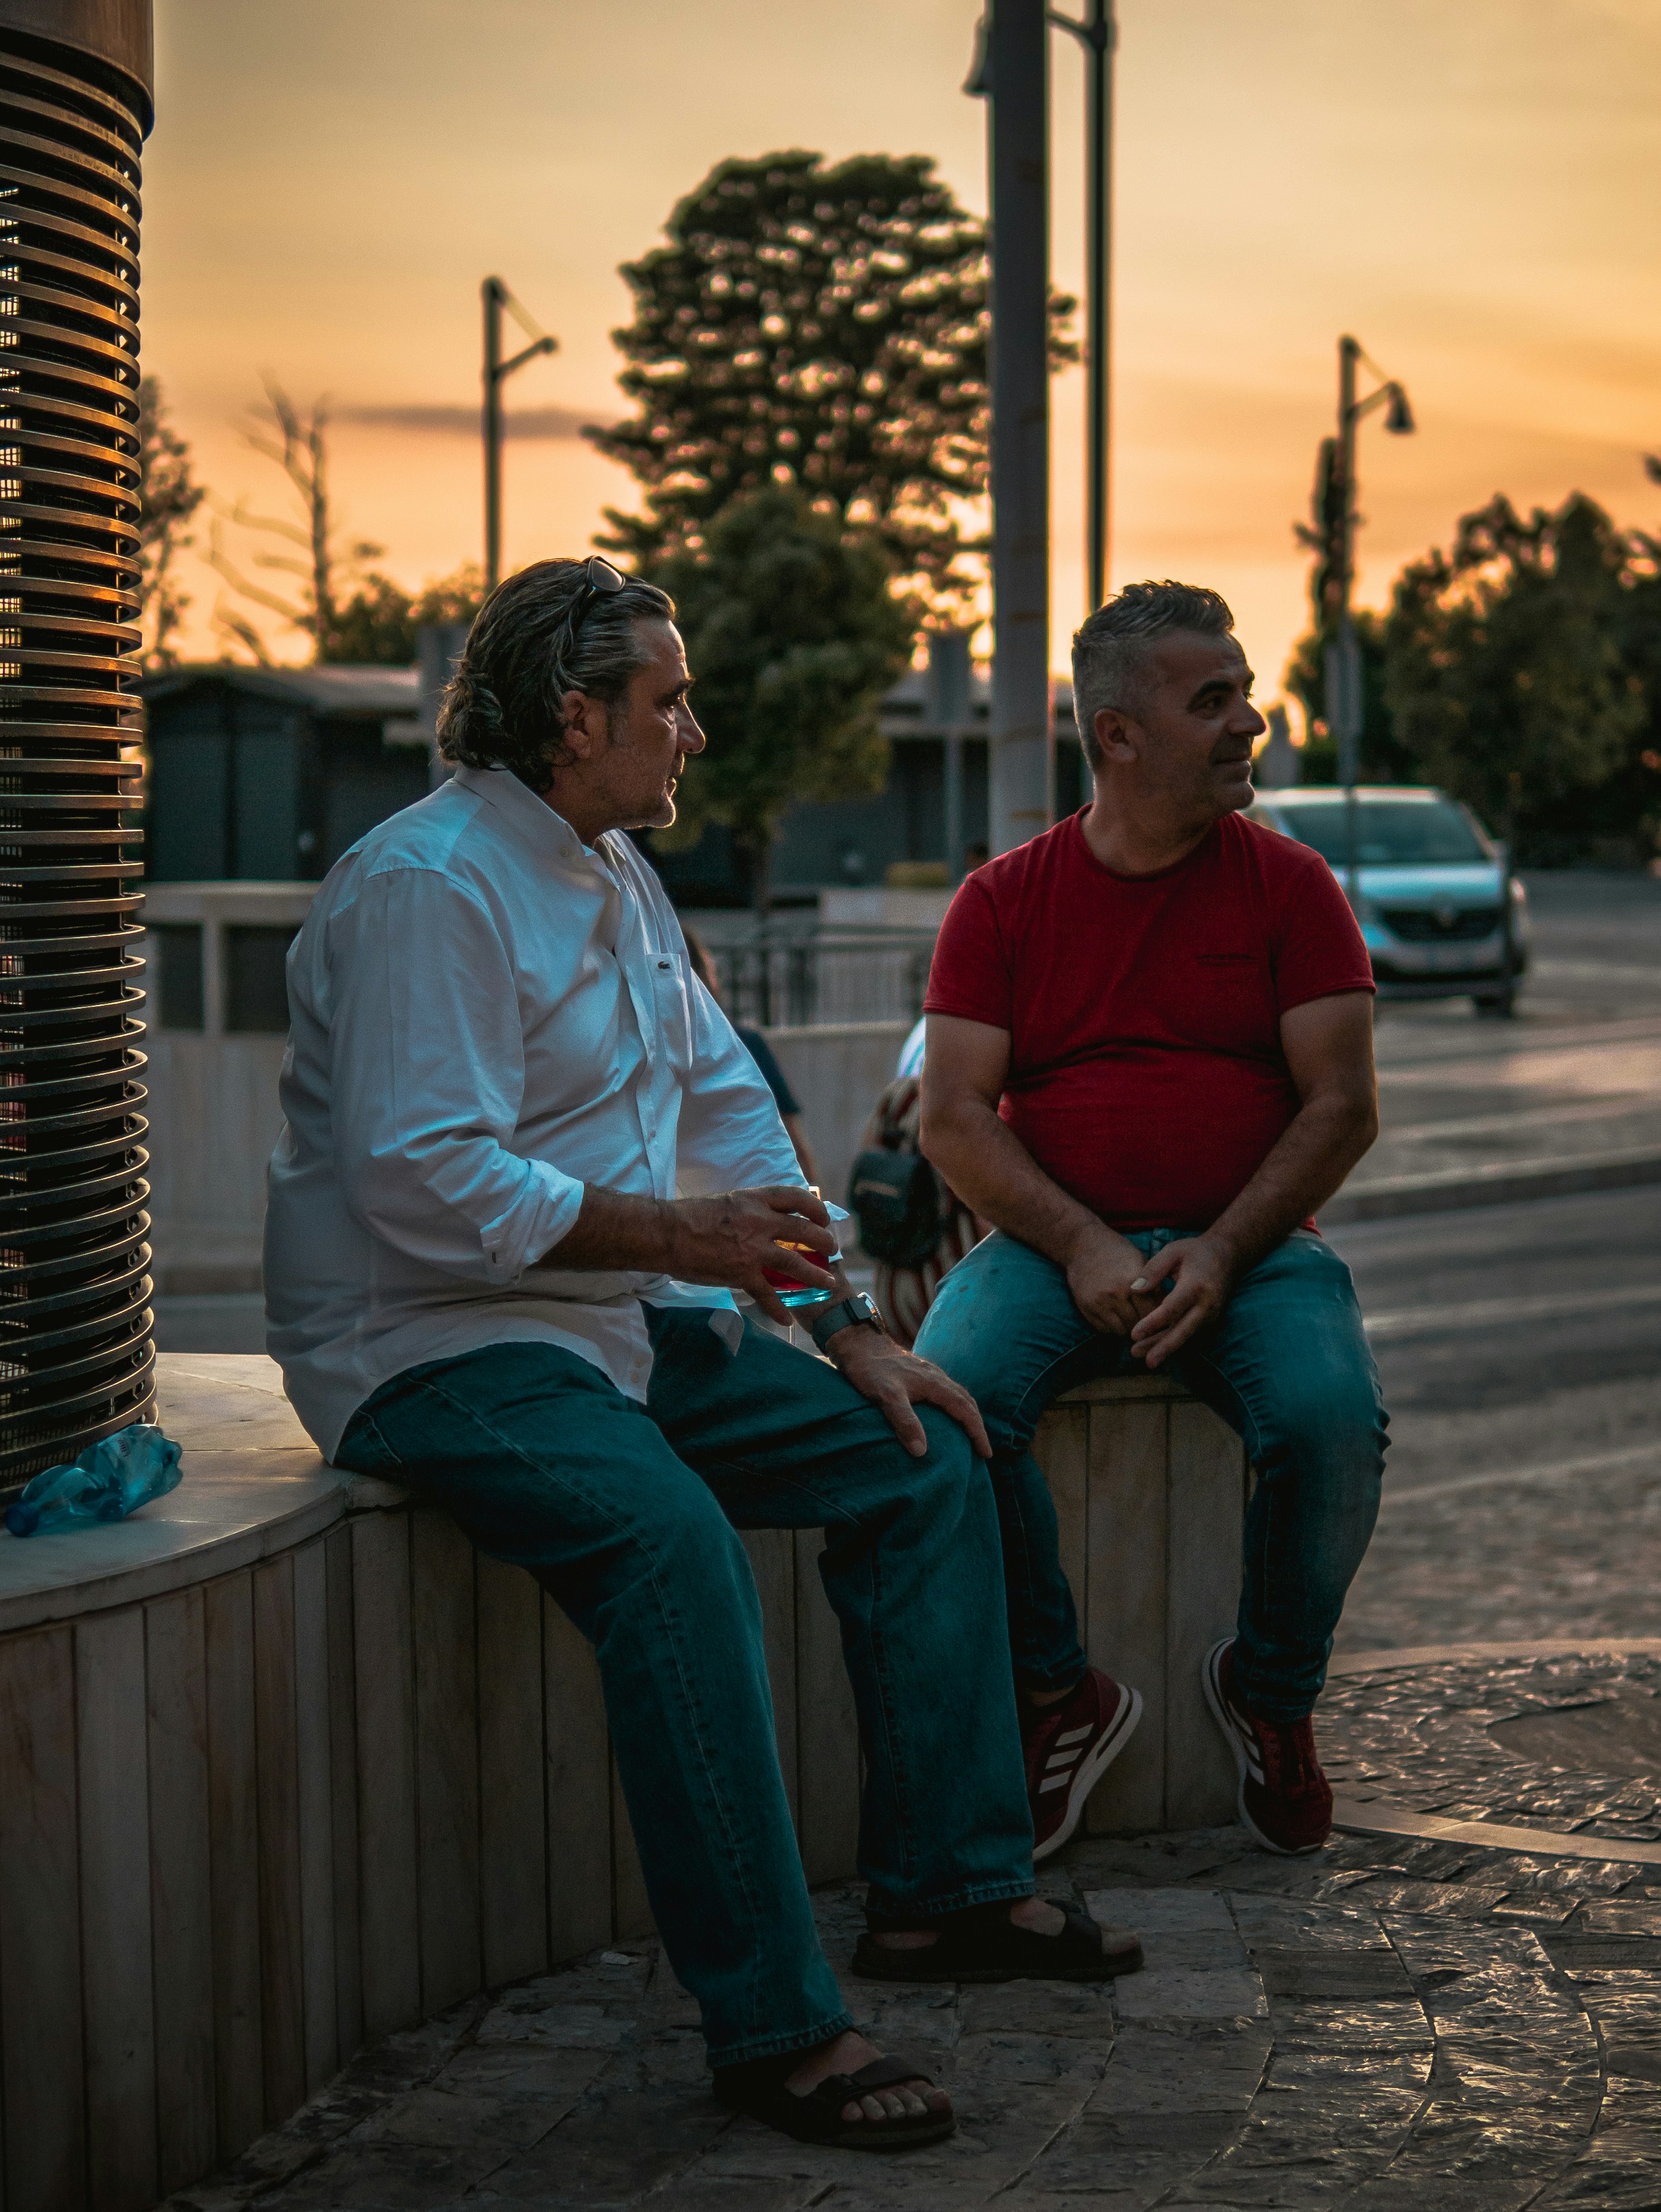 Two men sitting outside chatting and drinking during the sunset. Street photography.